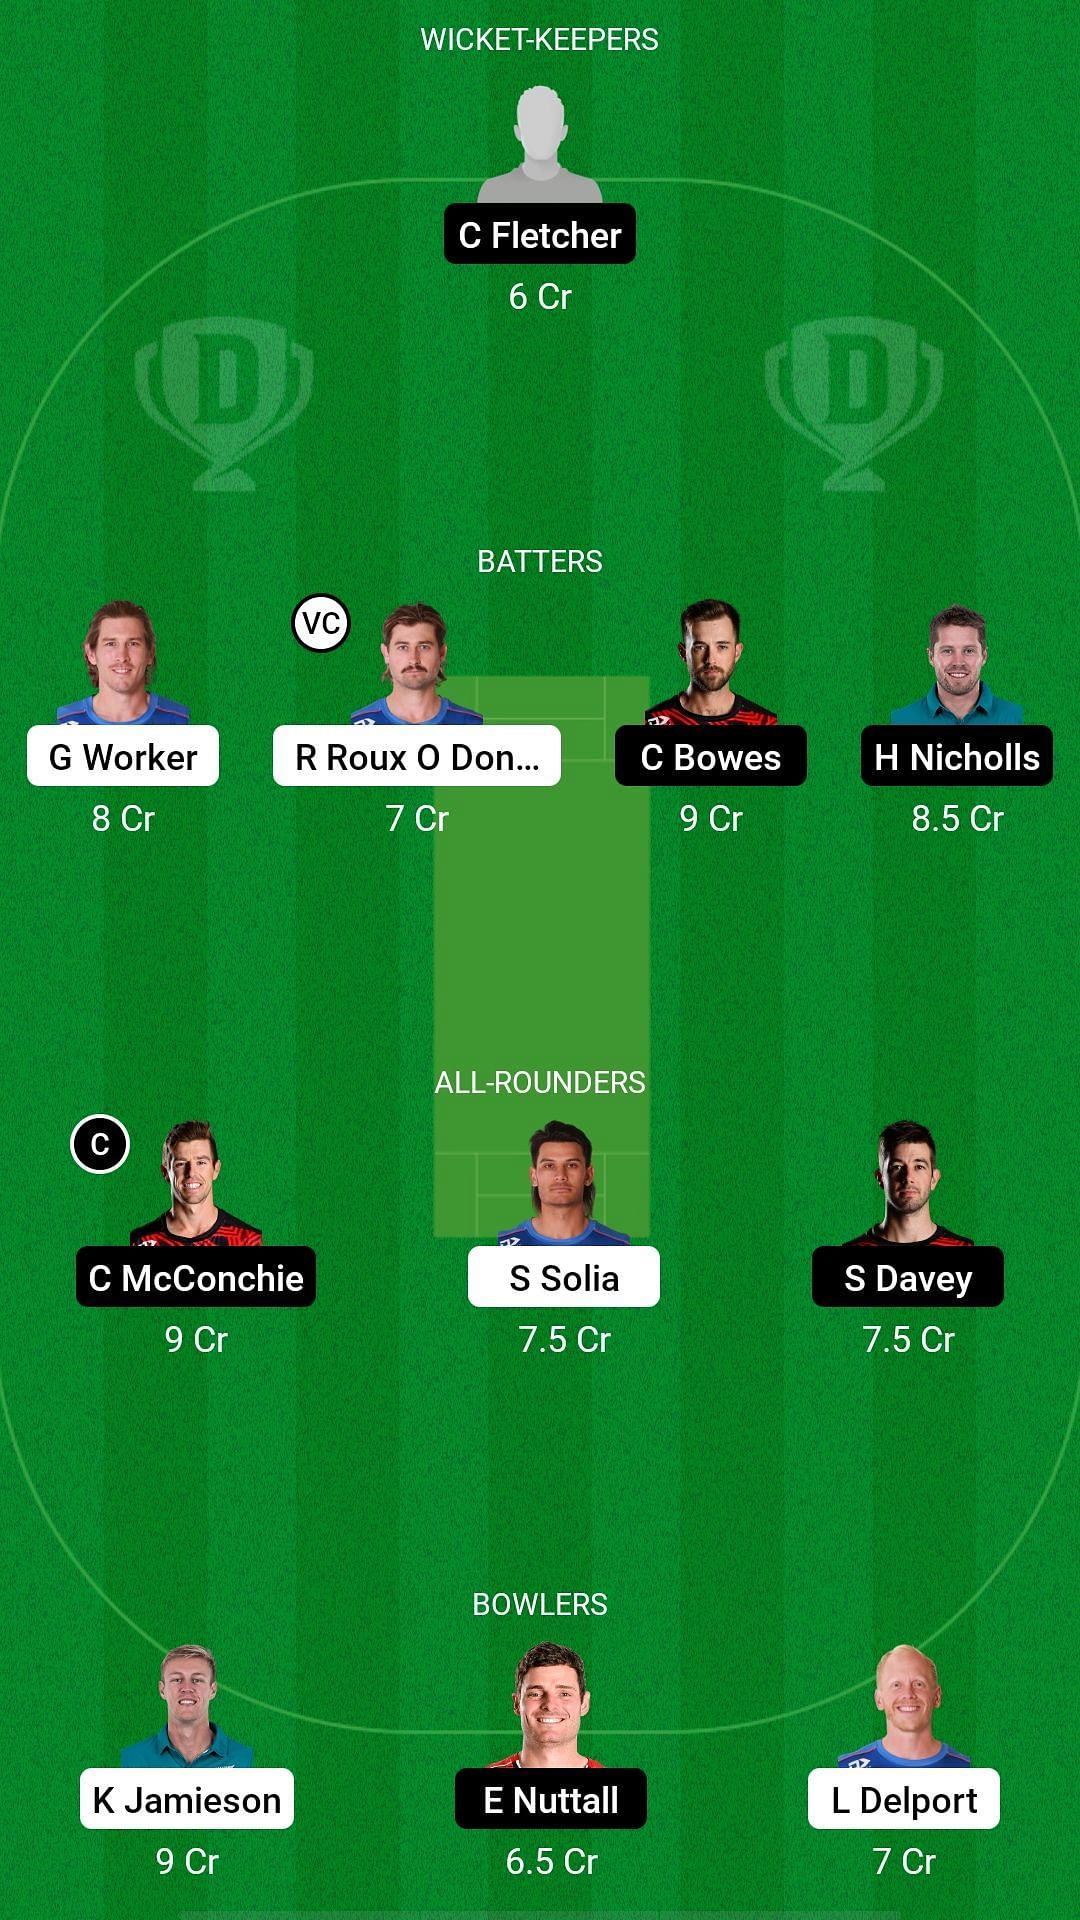 Auckland Aces vs Canterbury Kings Dream11 Prediction - The Ford Trophy: Fantasy Suggestion #2